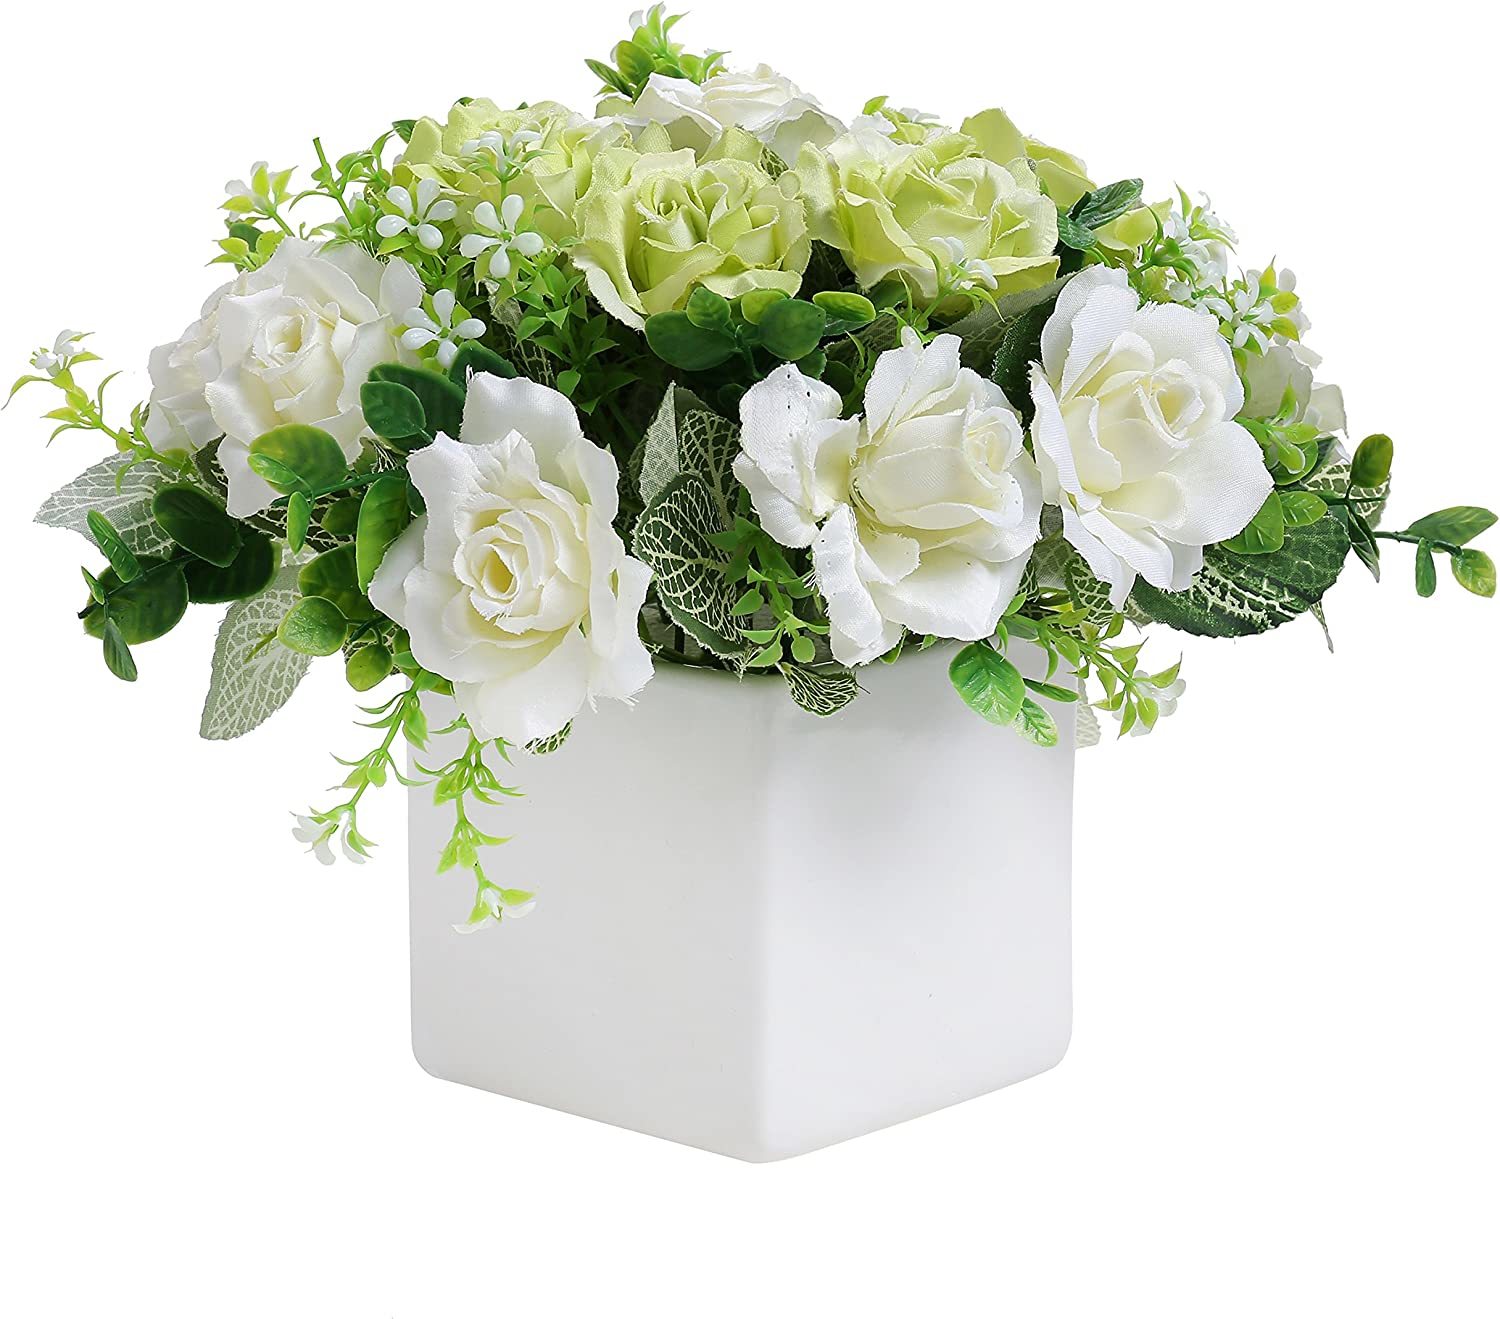 Mygift Artificial White Rose, Fake Flower Bouquet Arrangement In Square White - $39.99